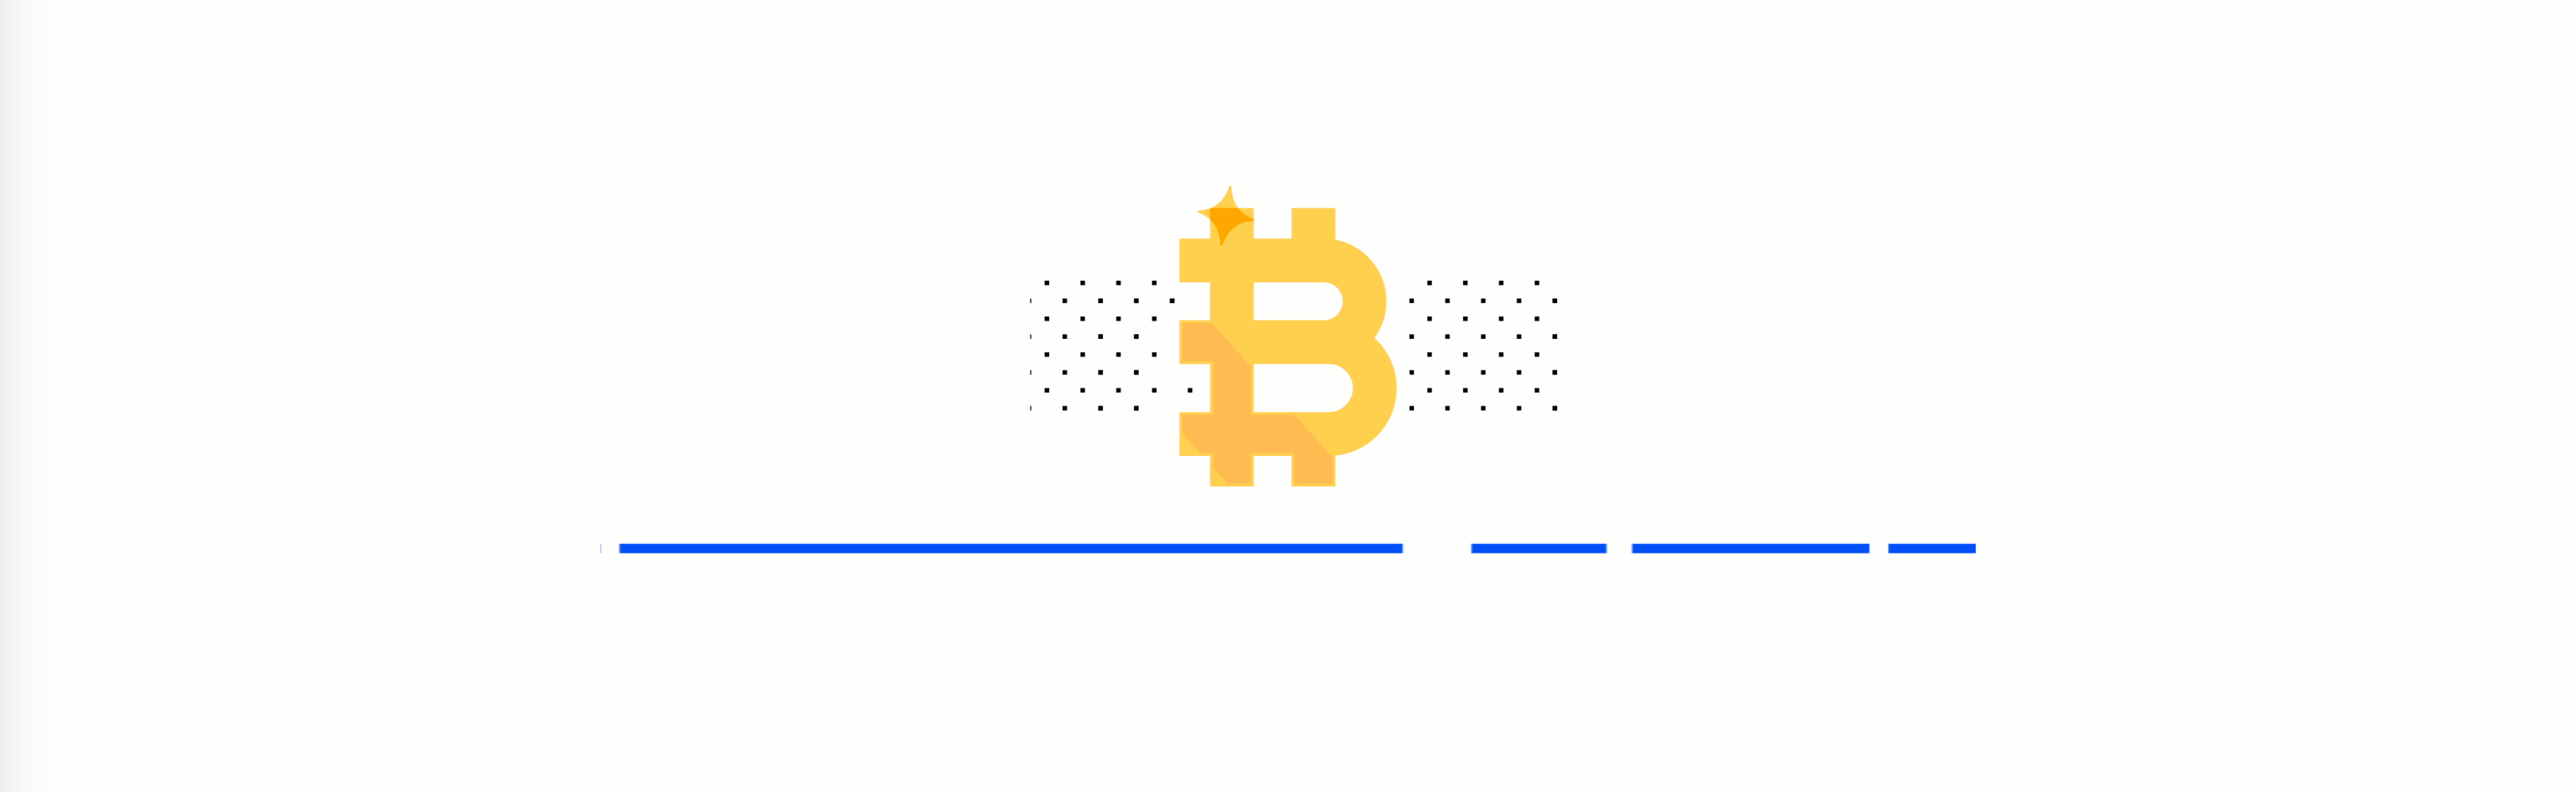 What Is The Bitcoin Halving Bitcoin Is Often Called Digital Gold By Coinbase The Coinbase Blog